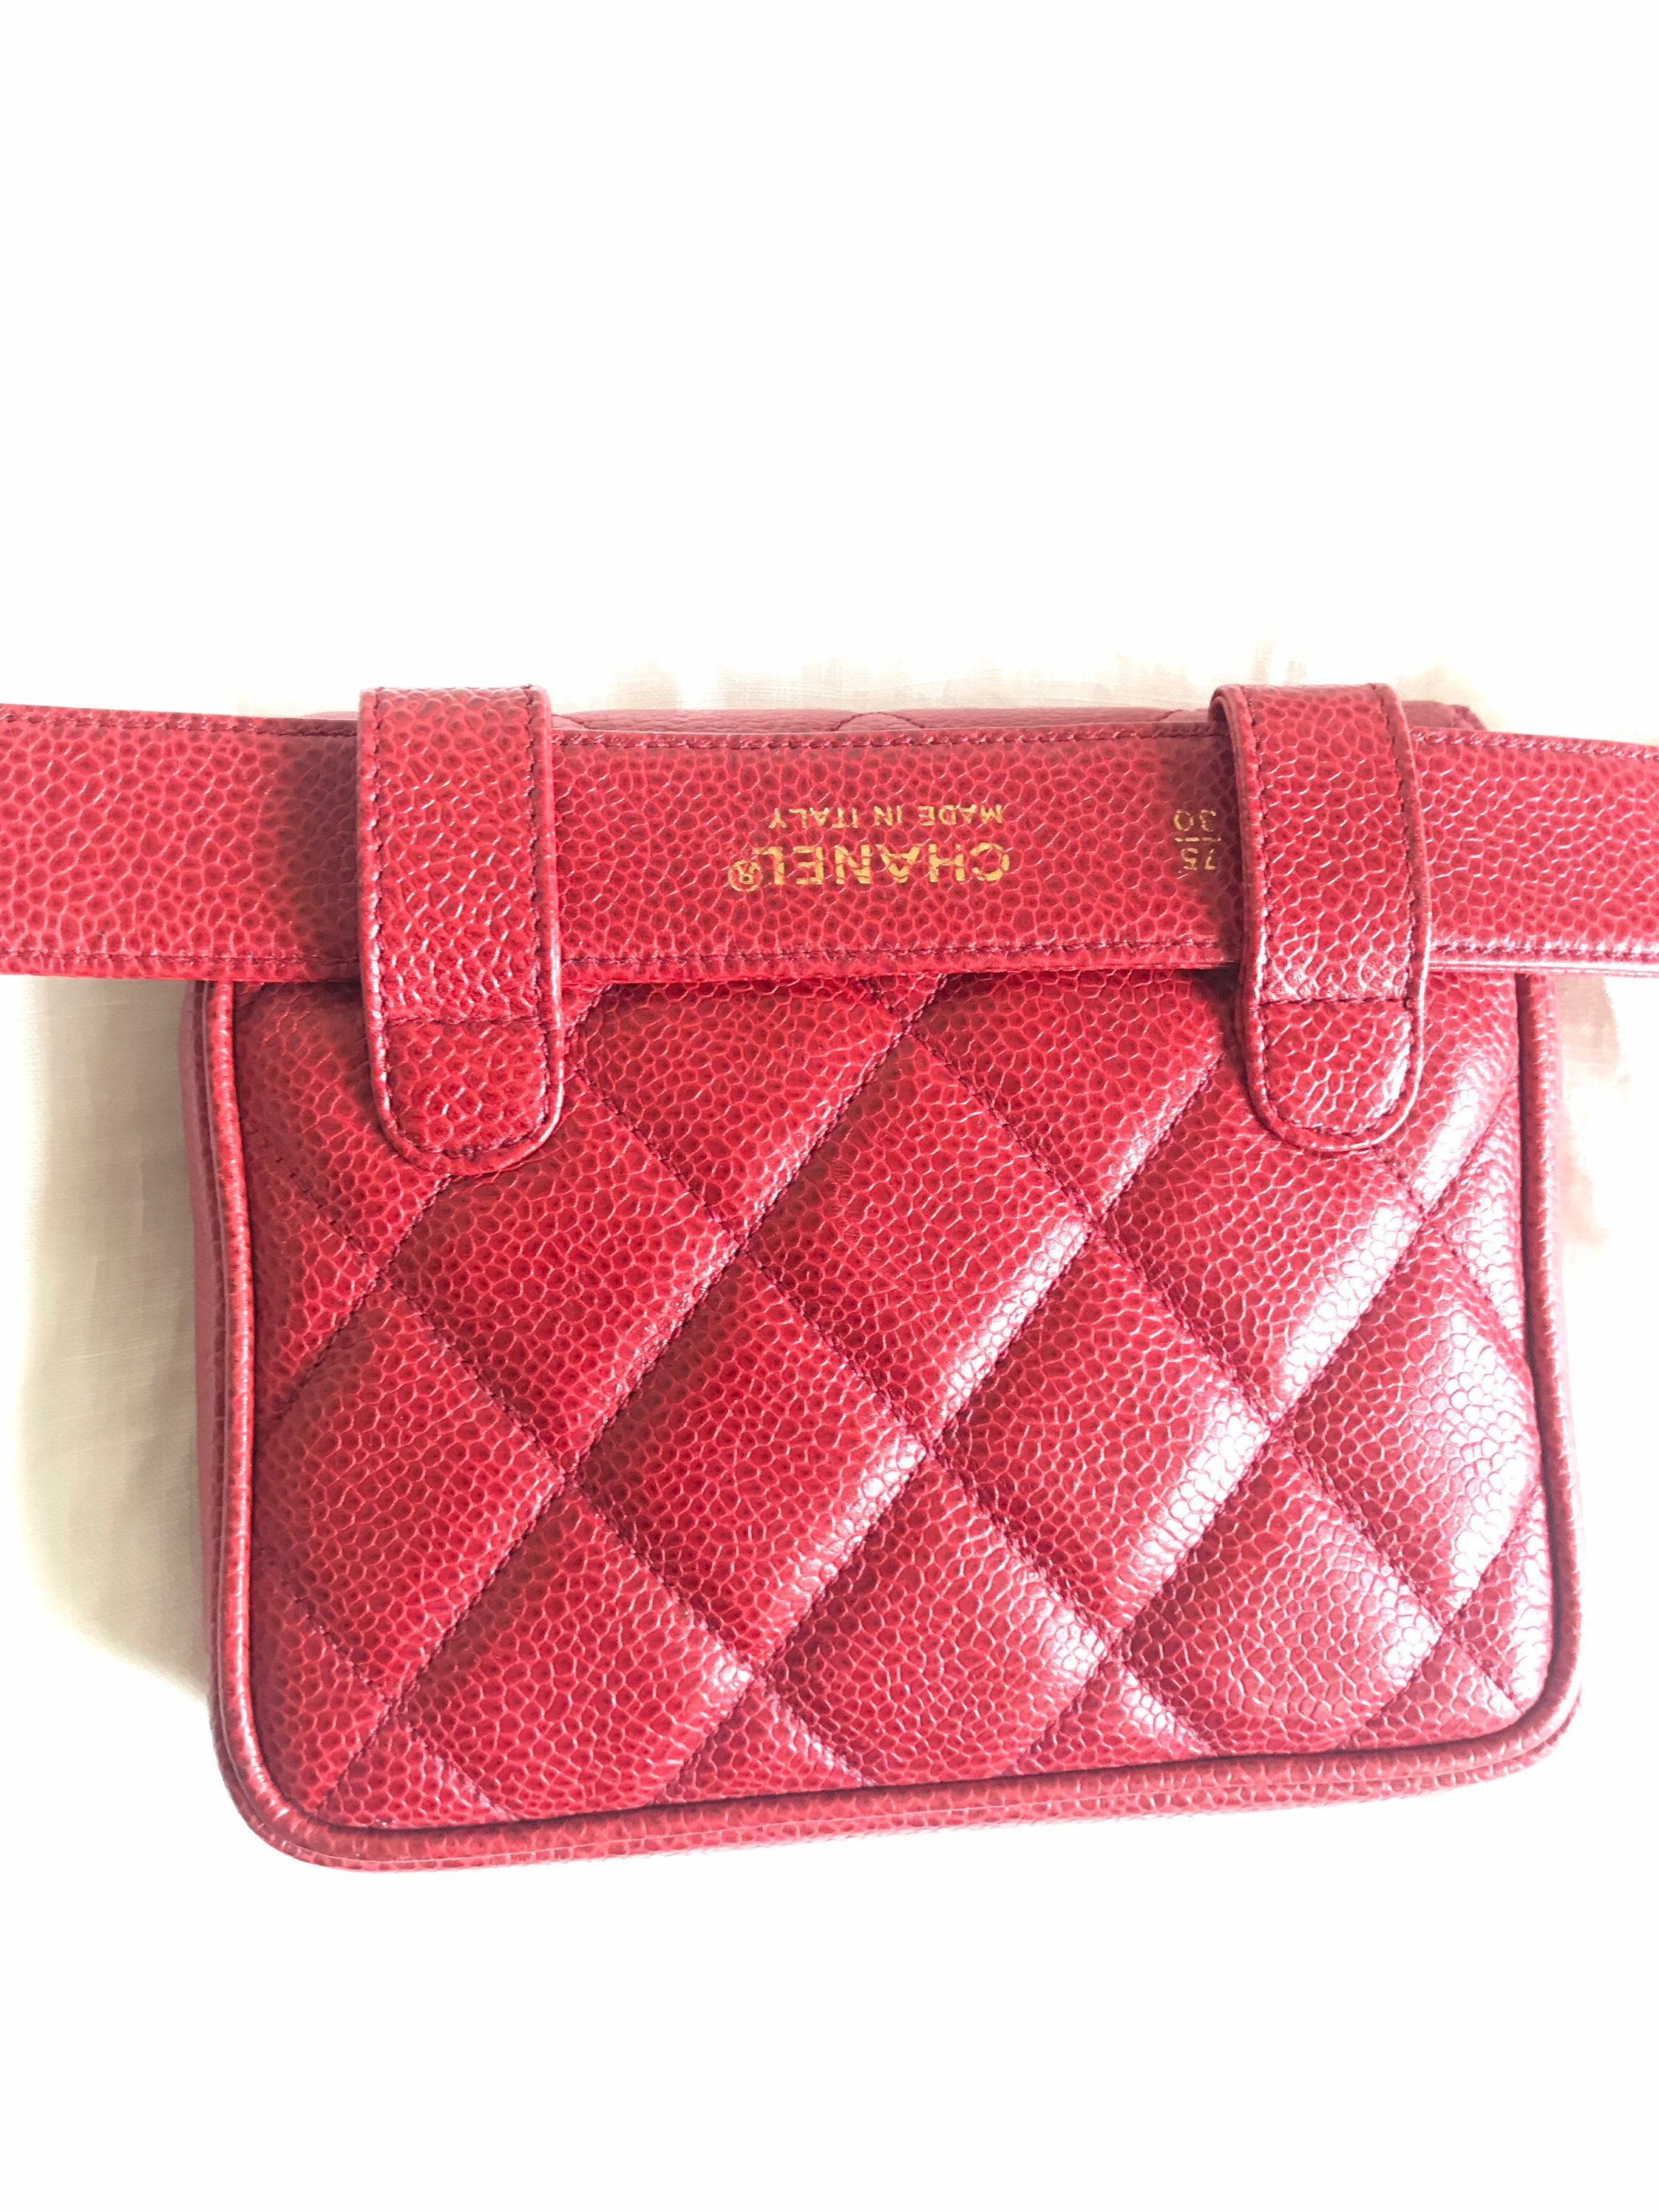 Vintage CHANEL 2.55 Red Caviar Waist Bag Fanny Pack With Belt 